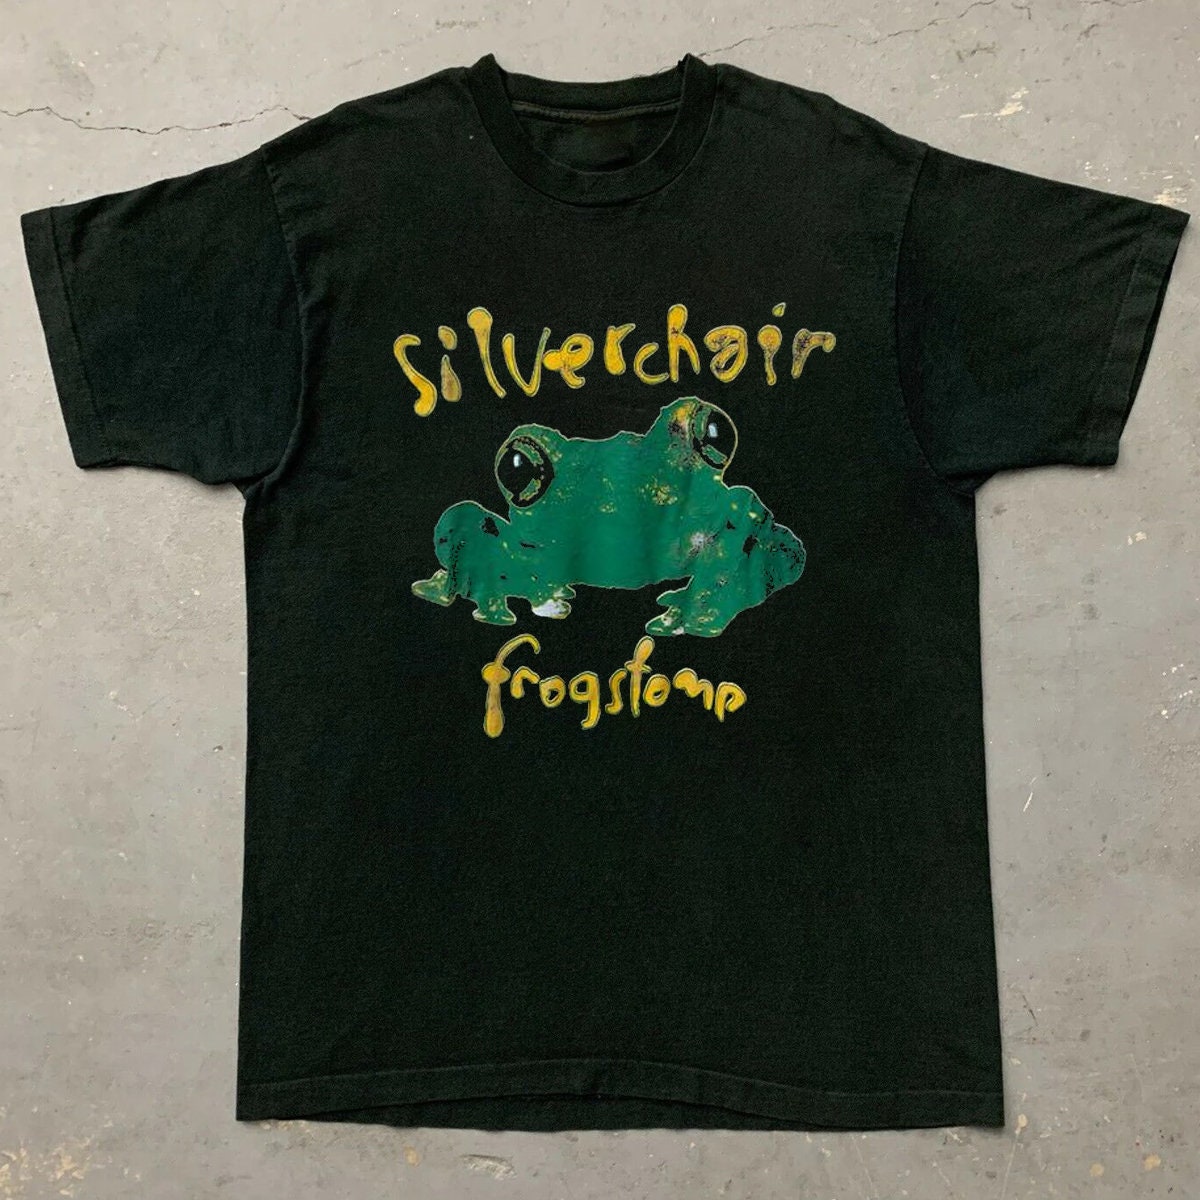 Discover Vintage Silverchair Frogstomp T-Shirt